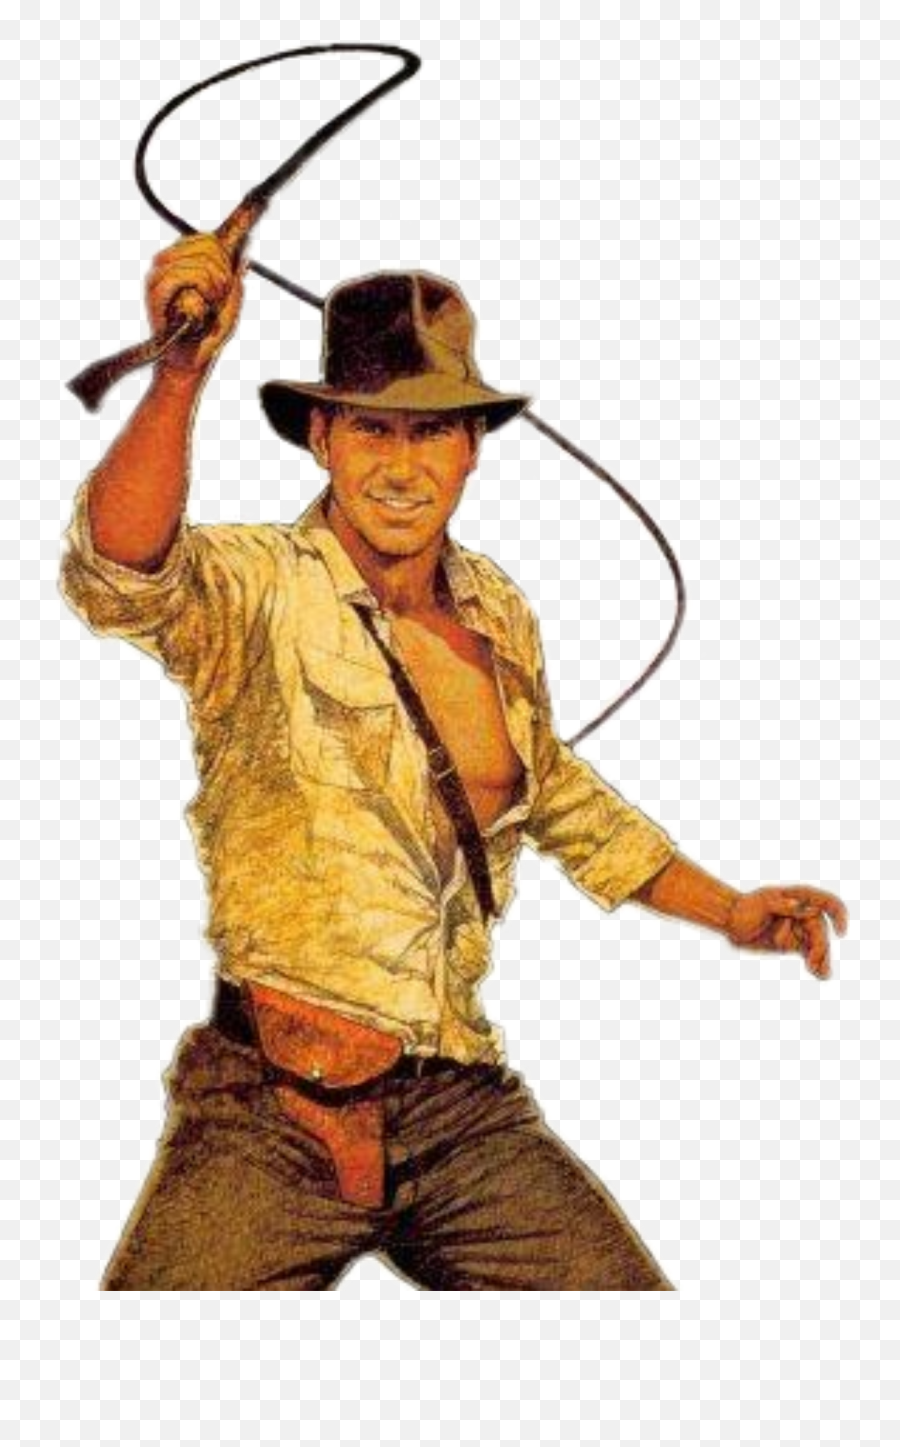 Largest Collection Of Free - Adventures Of Indiana Jones Emoji,Whip Emoticon